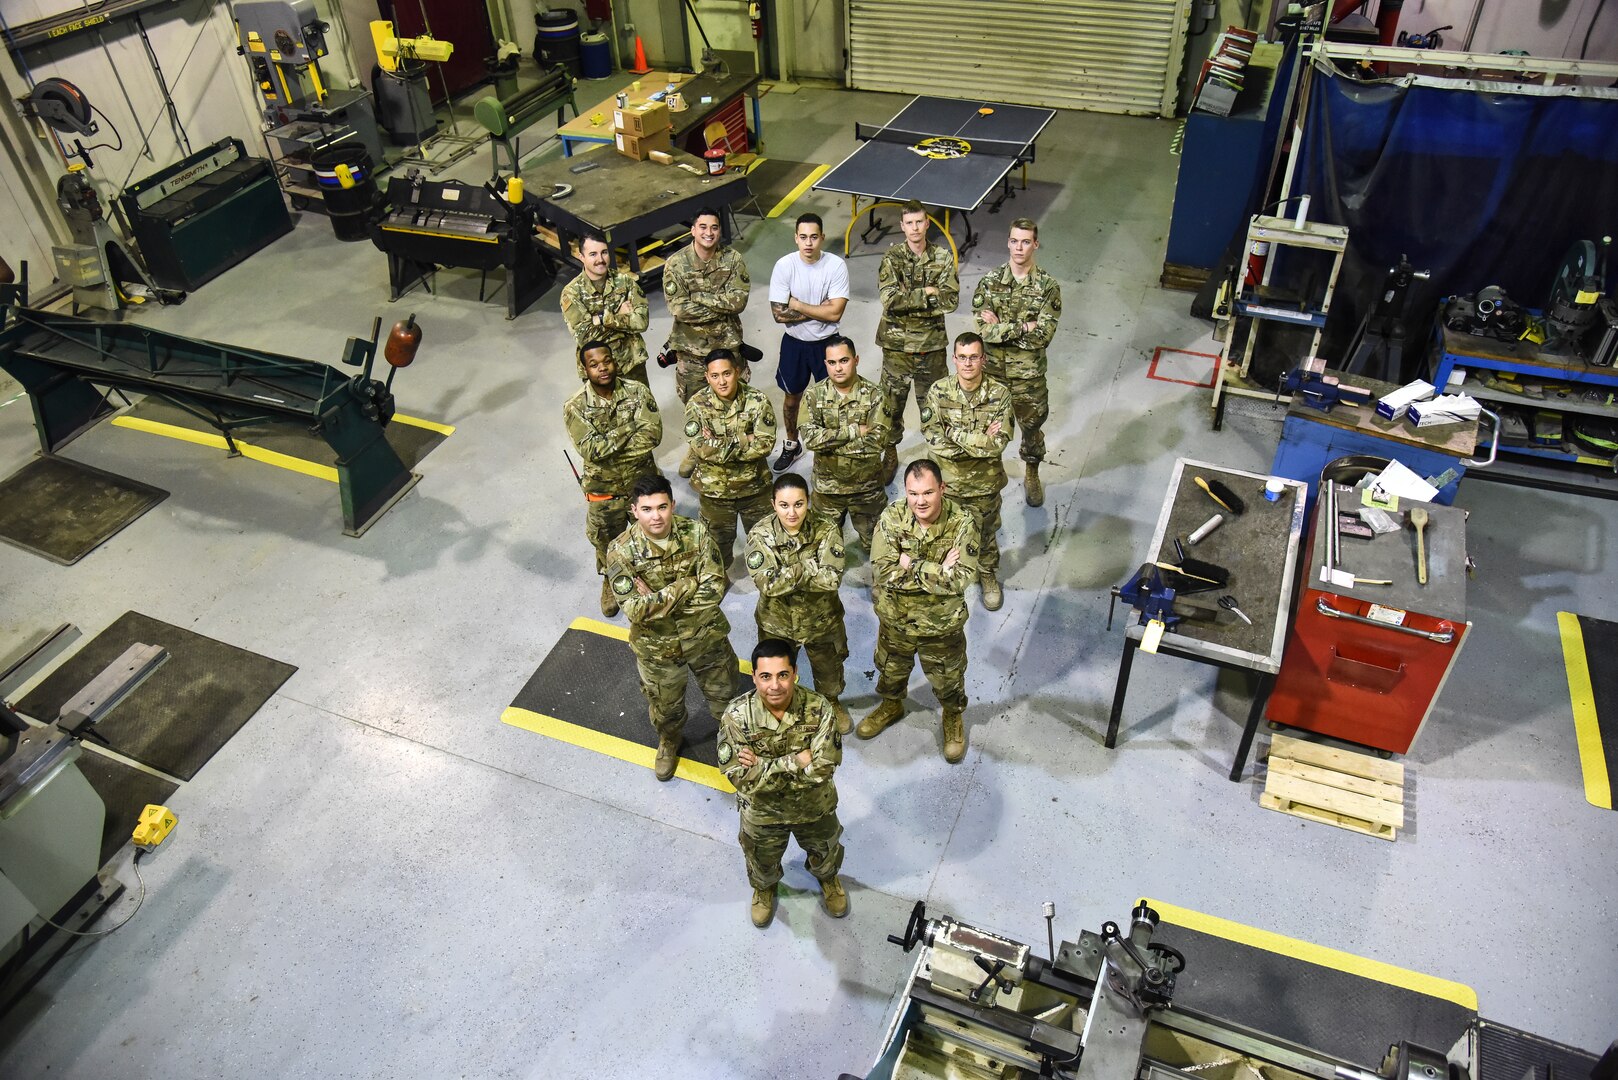 The 380th Expeditionary Maintenance Squadron fabrication flight poses for a group photo at Al Dhafra Air Base, United Arab Emirates, Dec. 10, 2018. The fabrication flight, also known as “Fab Flight” or the “American chopper of aircraft maintenance” is comprised of Sheet Metals, Non-Destructive Inspection and Aircraft Structural Repair technicians. (U.S. Air Force photo by Senior Airman Mya M. Crosby)